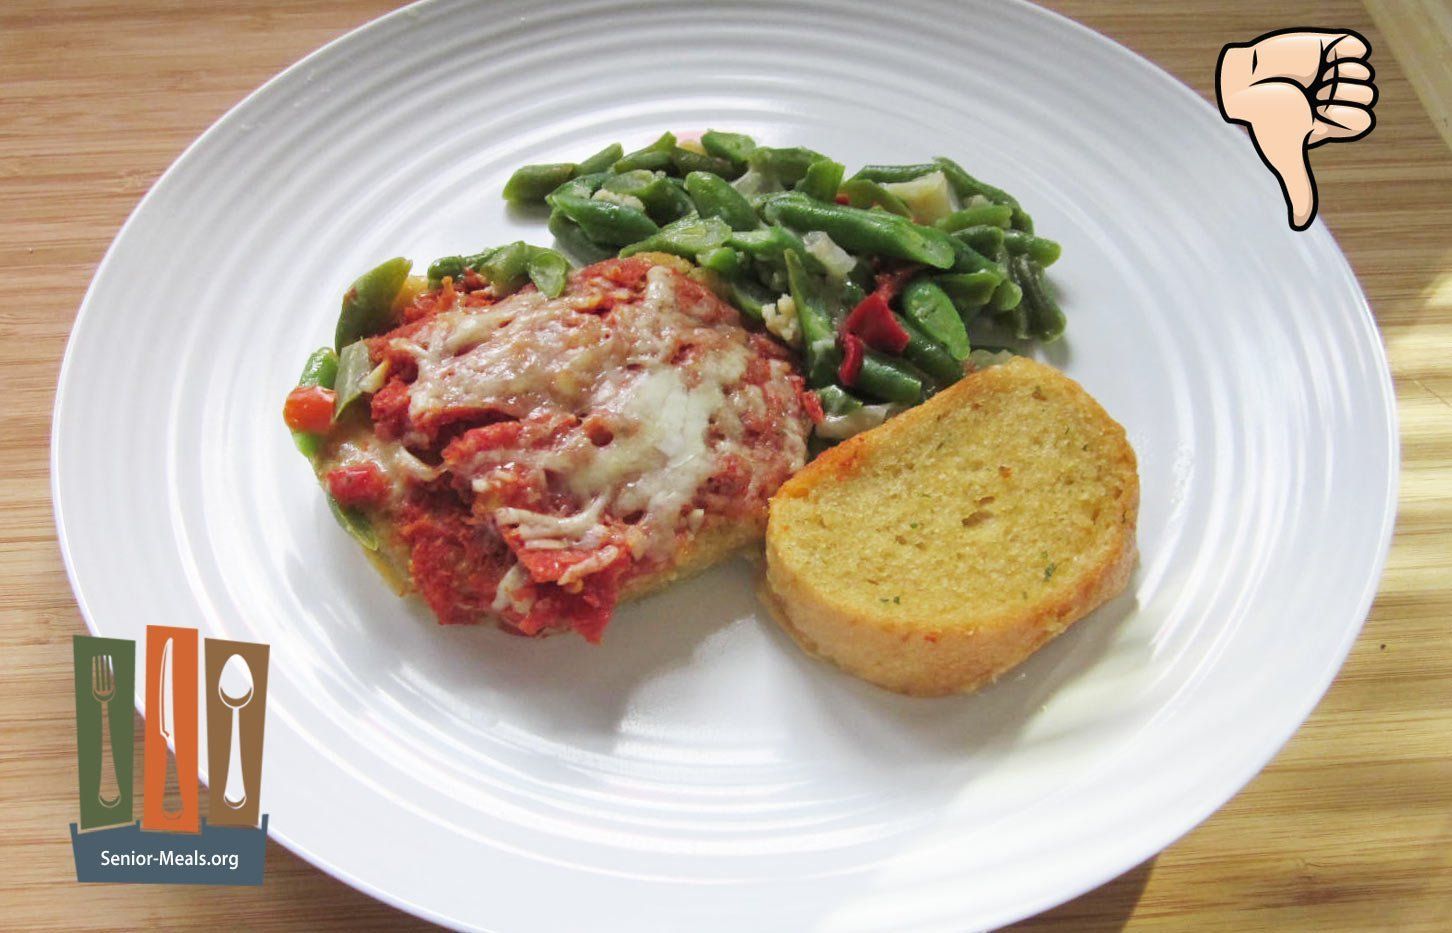 Eggplant Parmesan - Gross. You are Better Off Getting Frozen Meals from Your Local Market.